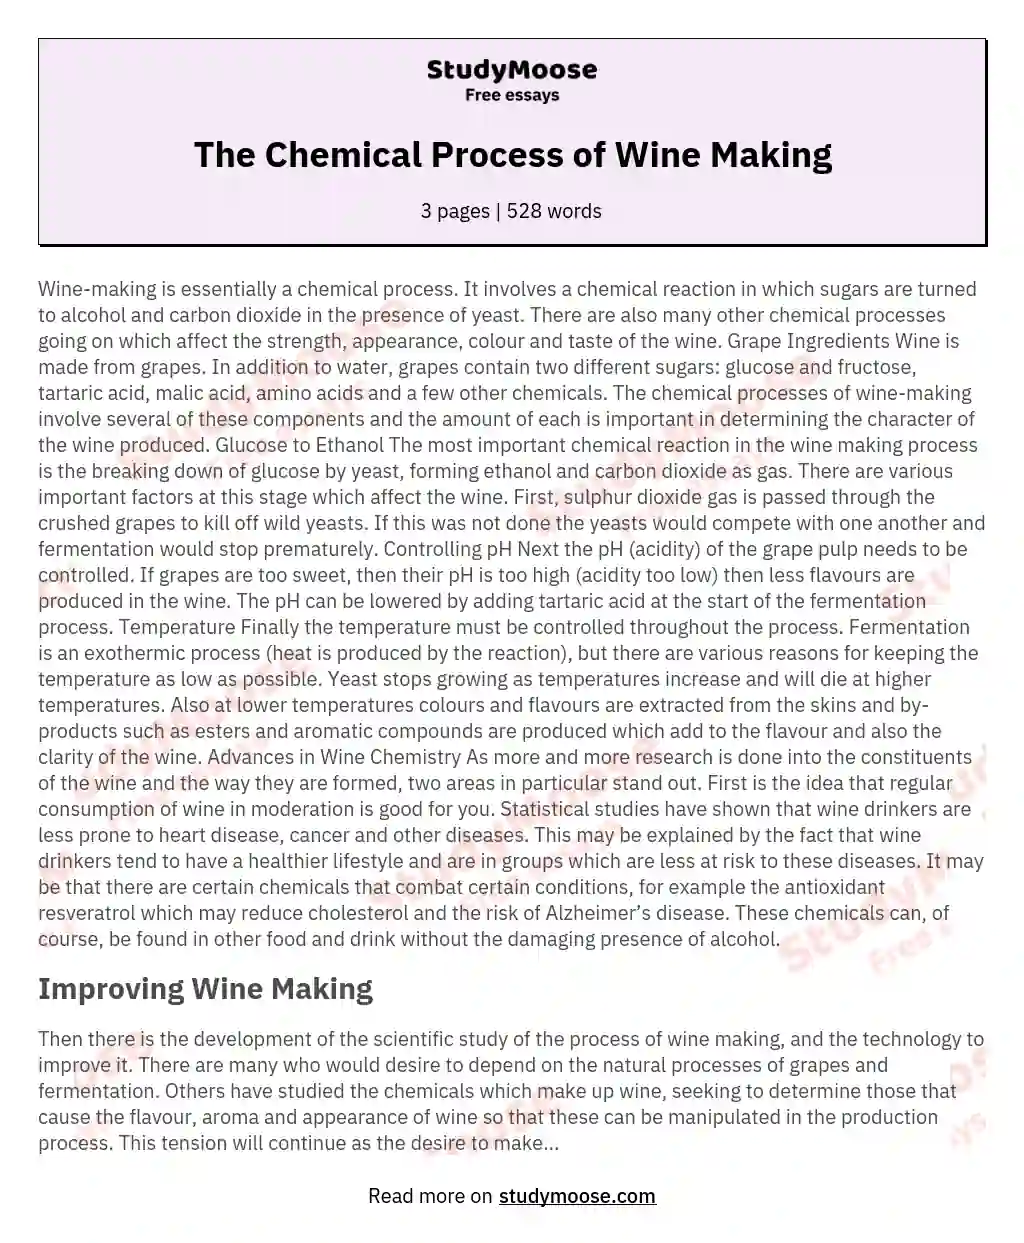 The Chemical Process of Wine Making essay